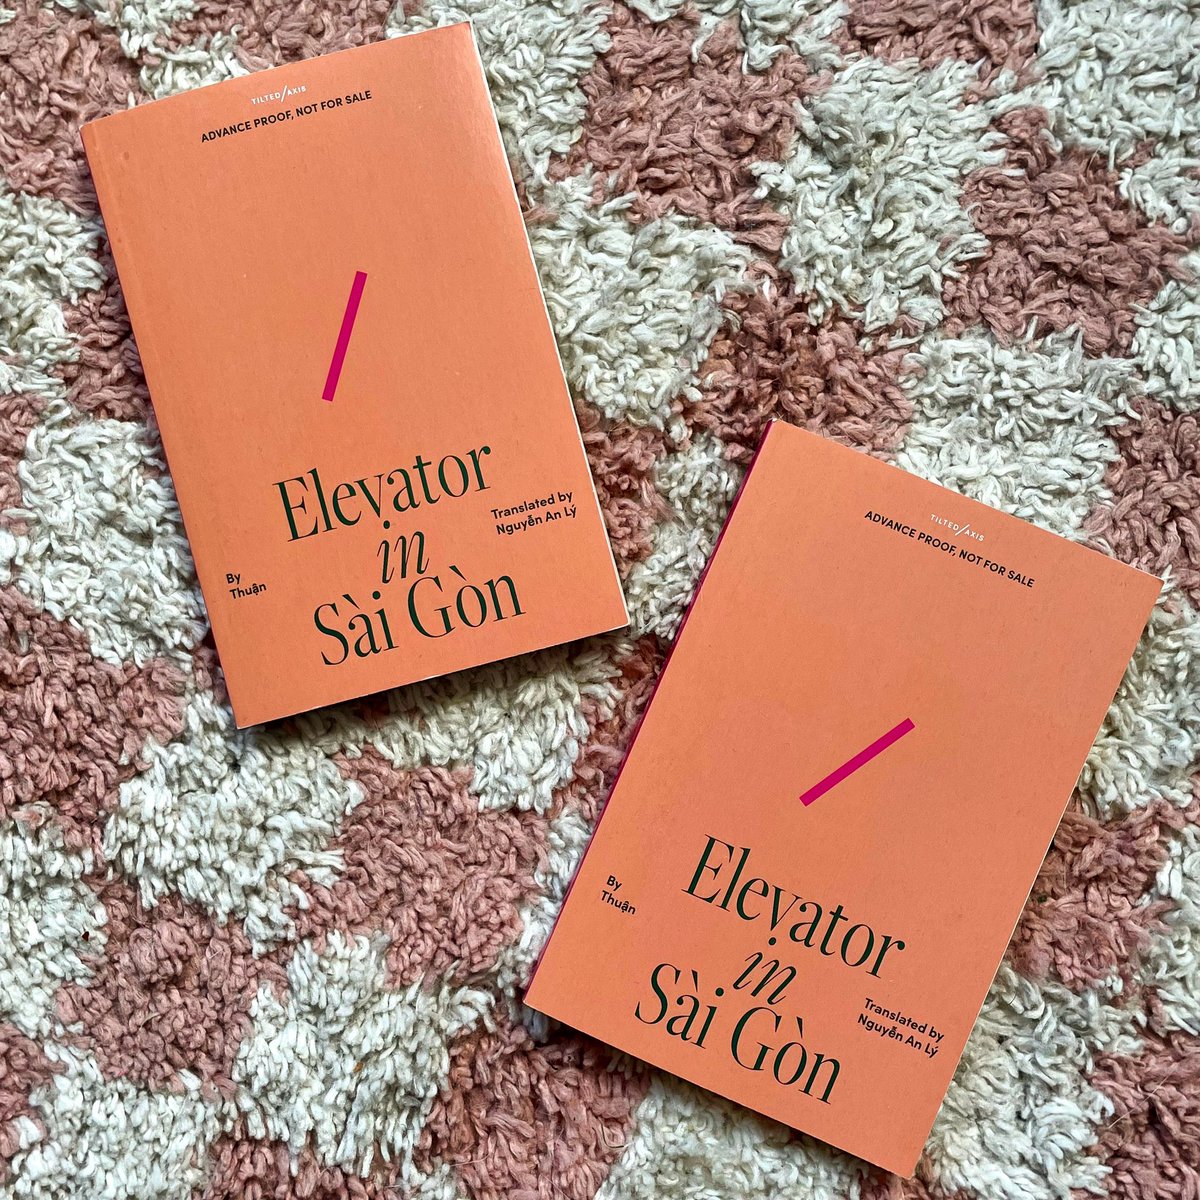 ❣️ELEVATOR IN SAIGON GIVEAWAY❣️ We were overwhelmed with the requests for our gorgeous proofs of ELEVATOR IN SAIGON by Thuận, translated by Nguyễn An Lý. Head to our instagram to enter the giveaway. instagram.com/p/C58Yj-IrOgk/…